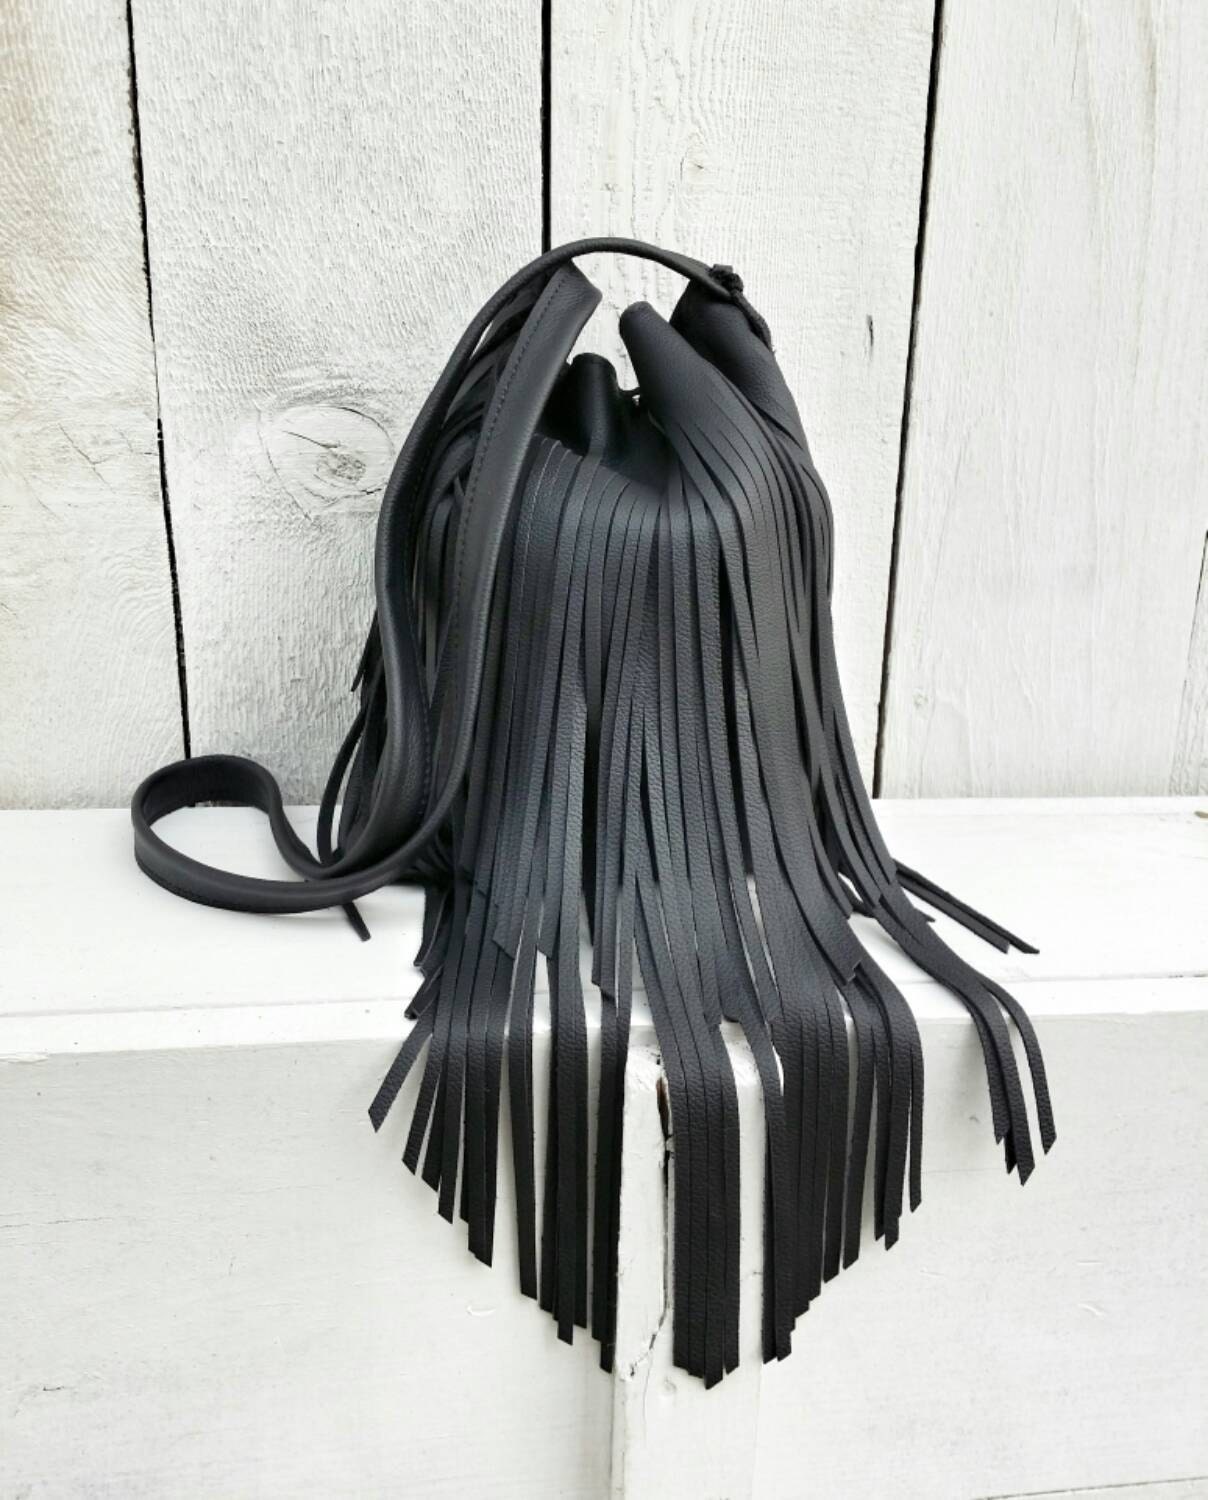 Boho Black Leather Fringed Purse / Black by RusticMoonLeather